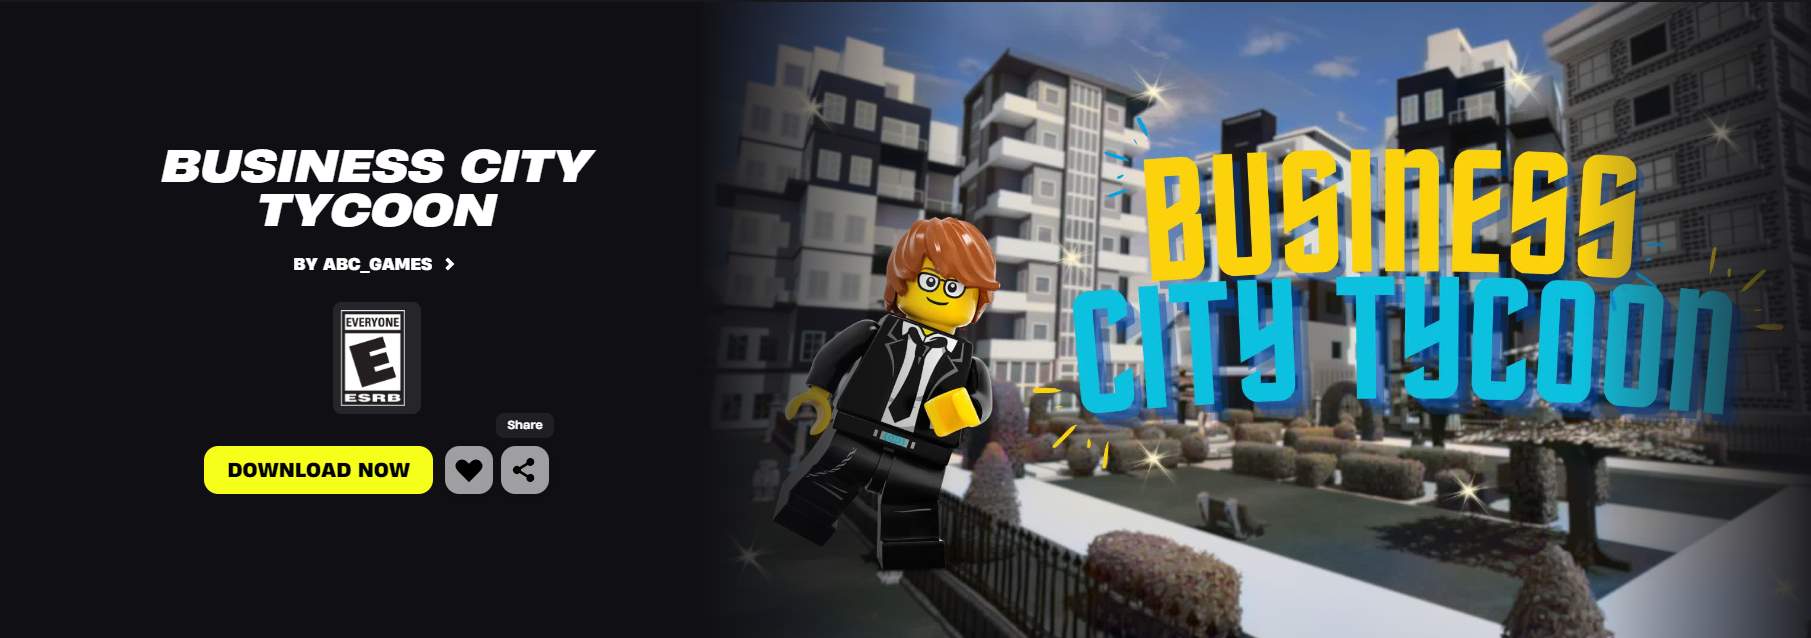 Business City Tycoon image 2